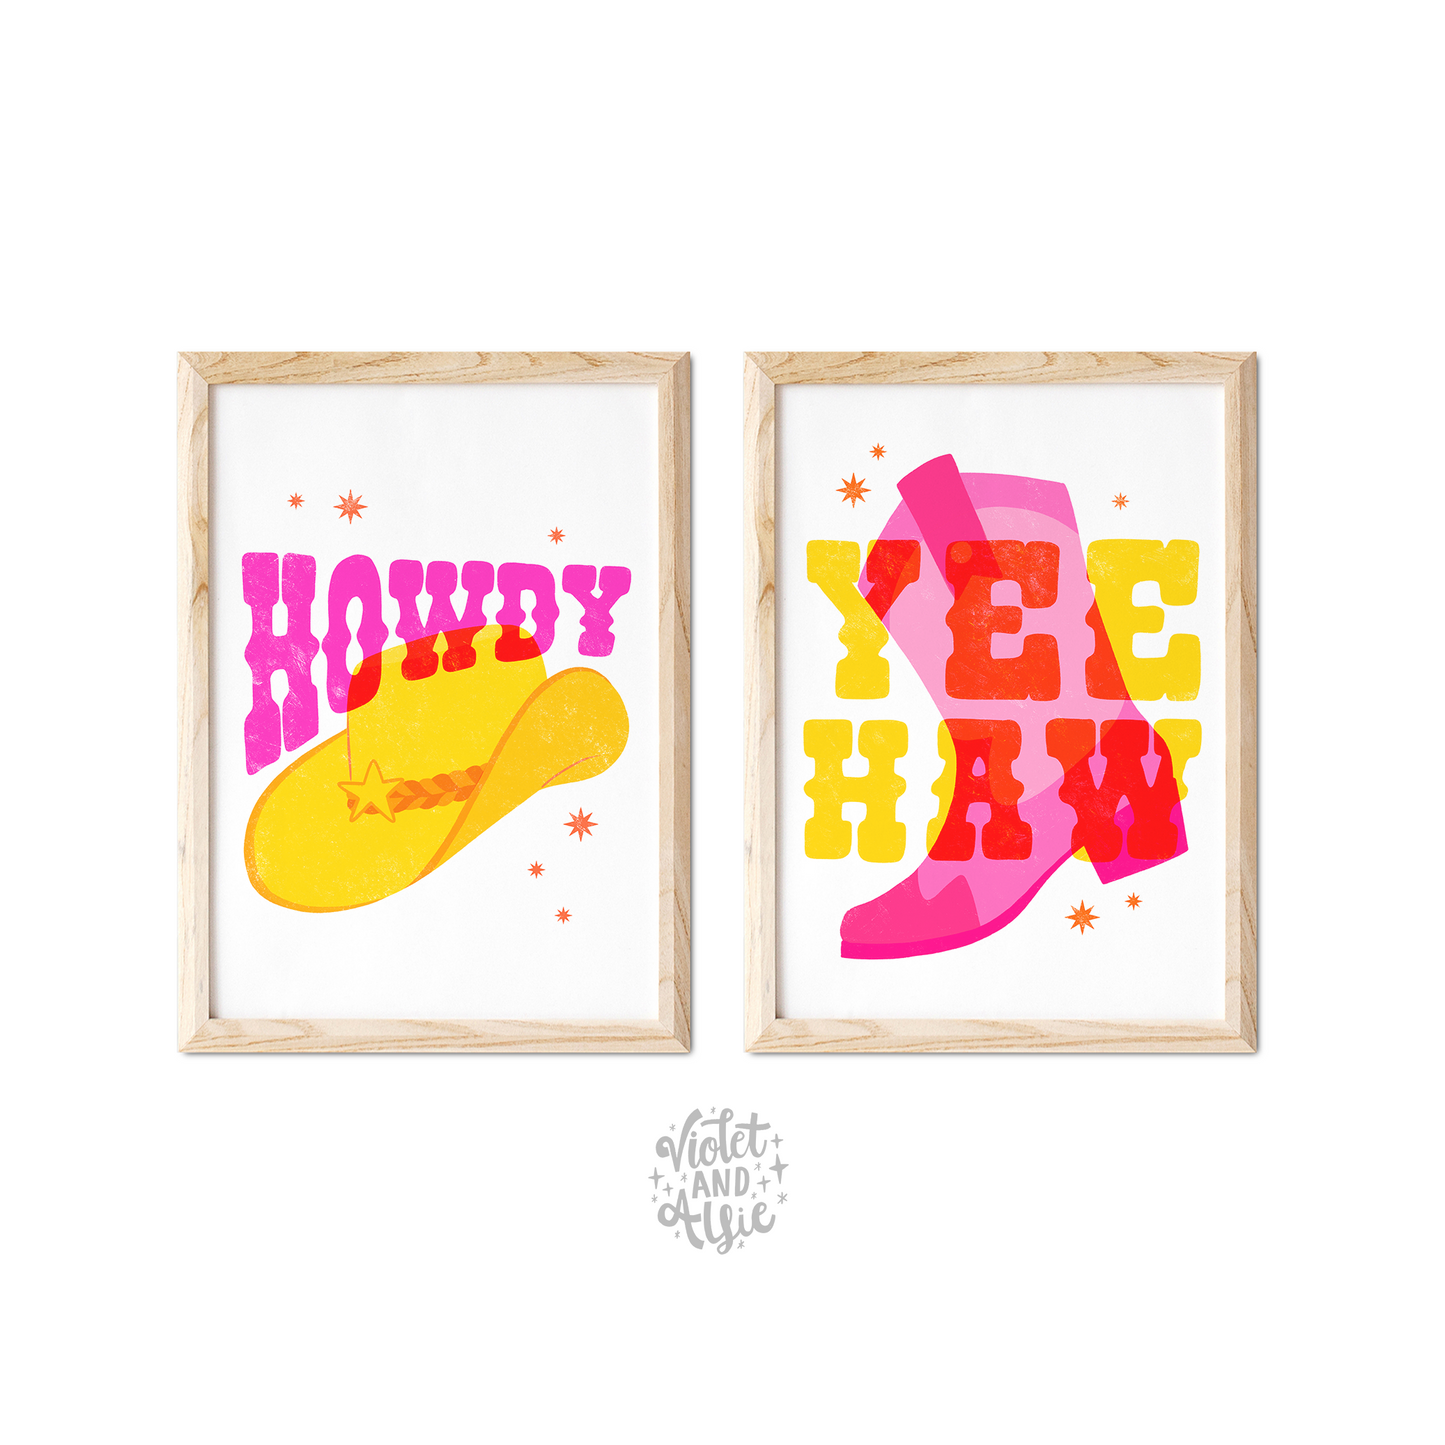 Modern cowboy decor, western style decor, country and western prints, yellow and pink, retro cowgirl vibe, howdy, yeehaw, cowboy hat, cowboy boot illustration, cowgirl aesthetic